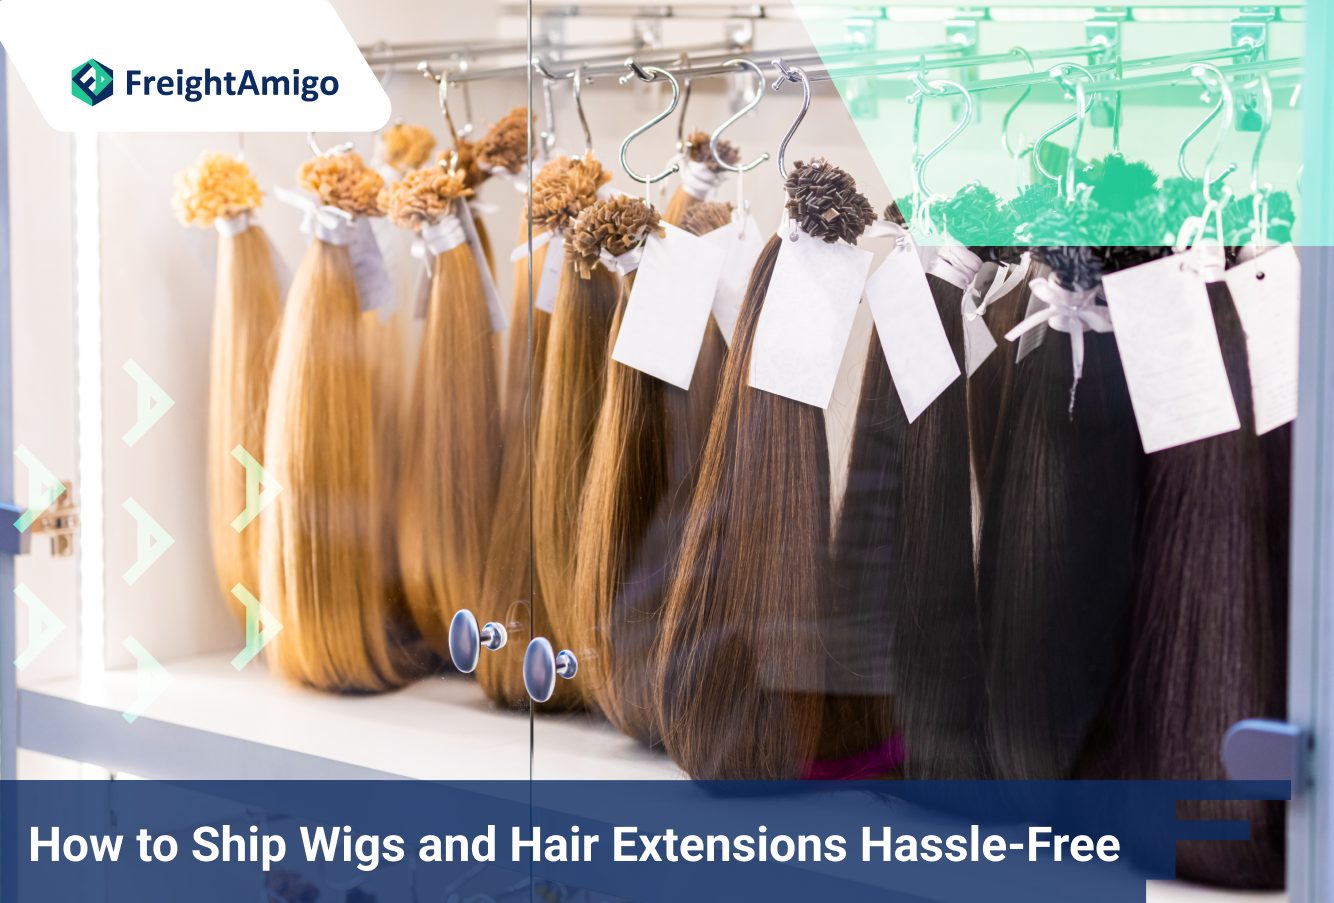 How to Ship Wigs and Hair Extensions Hassle-Free